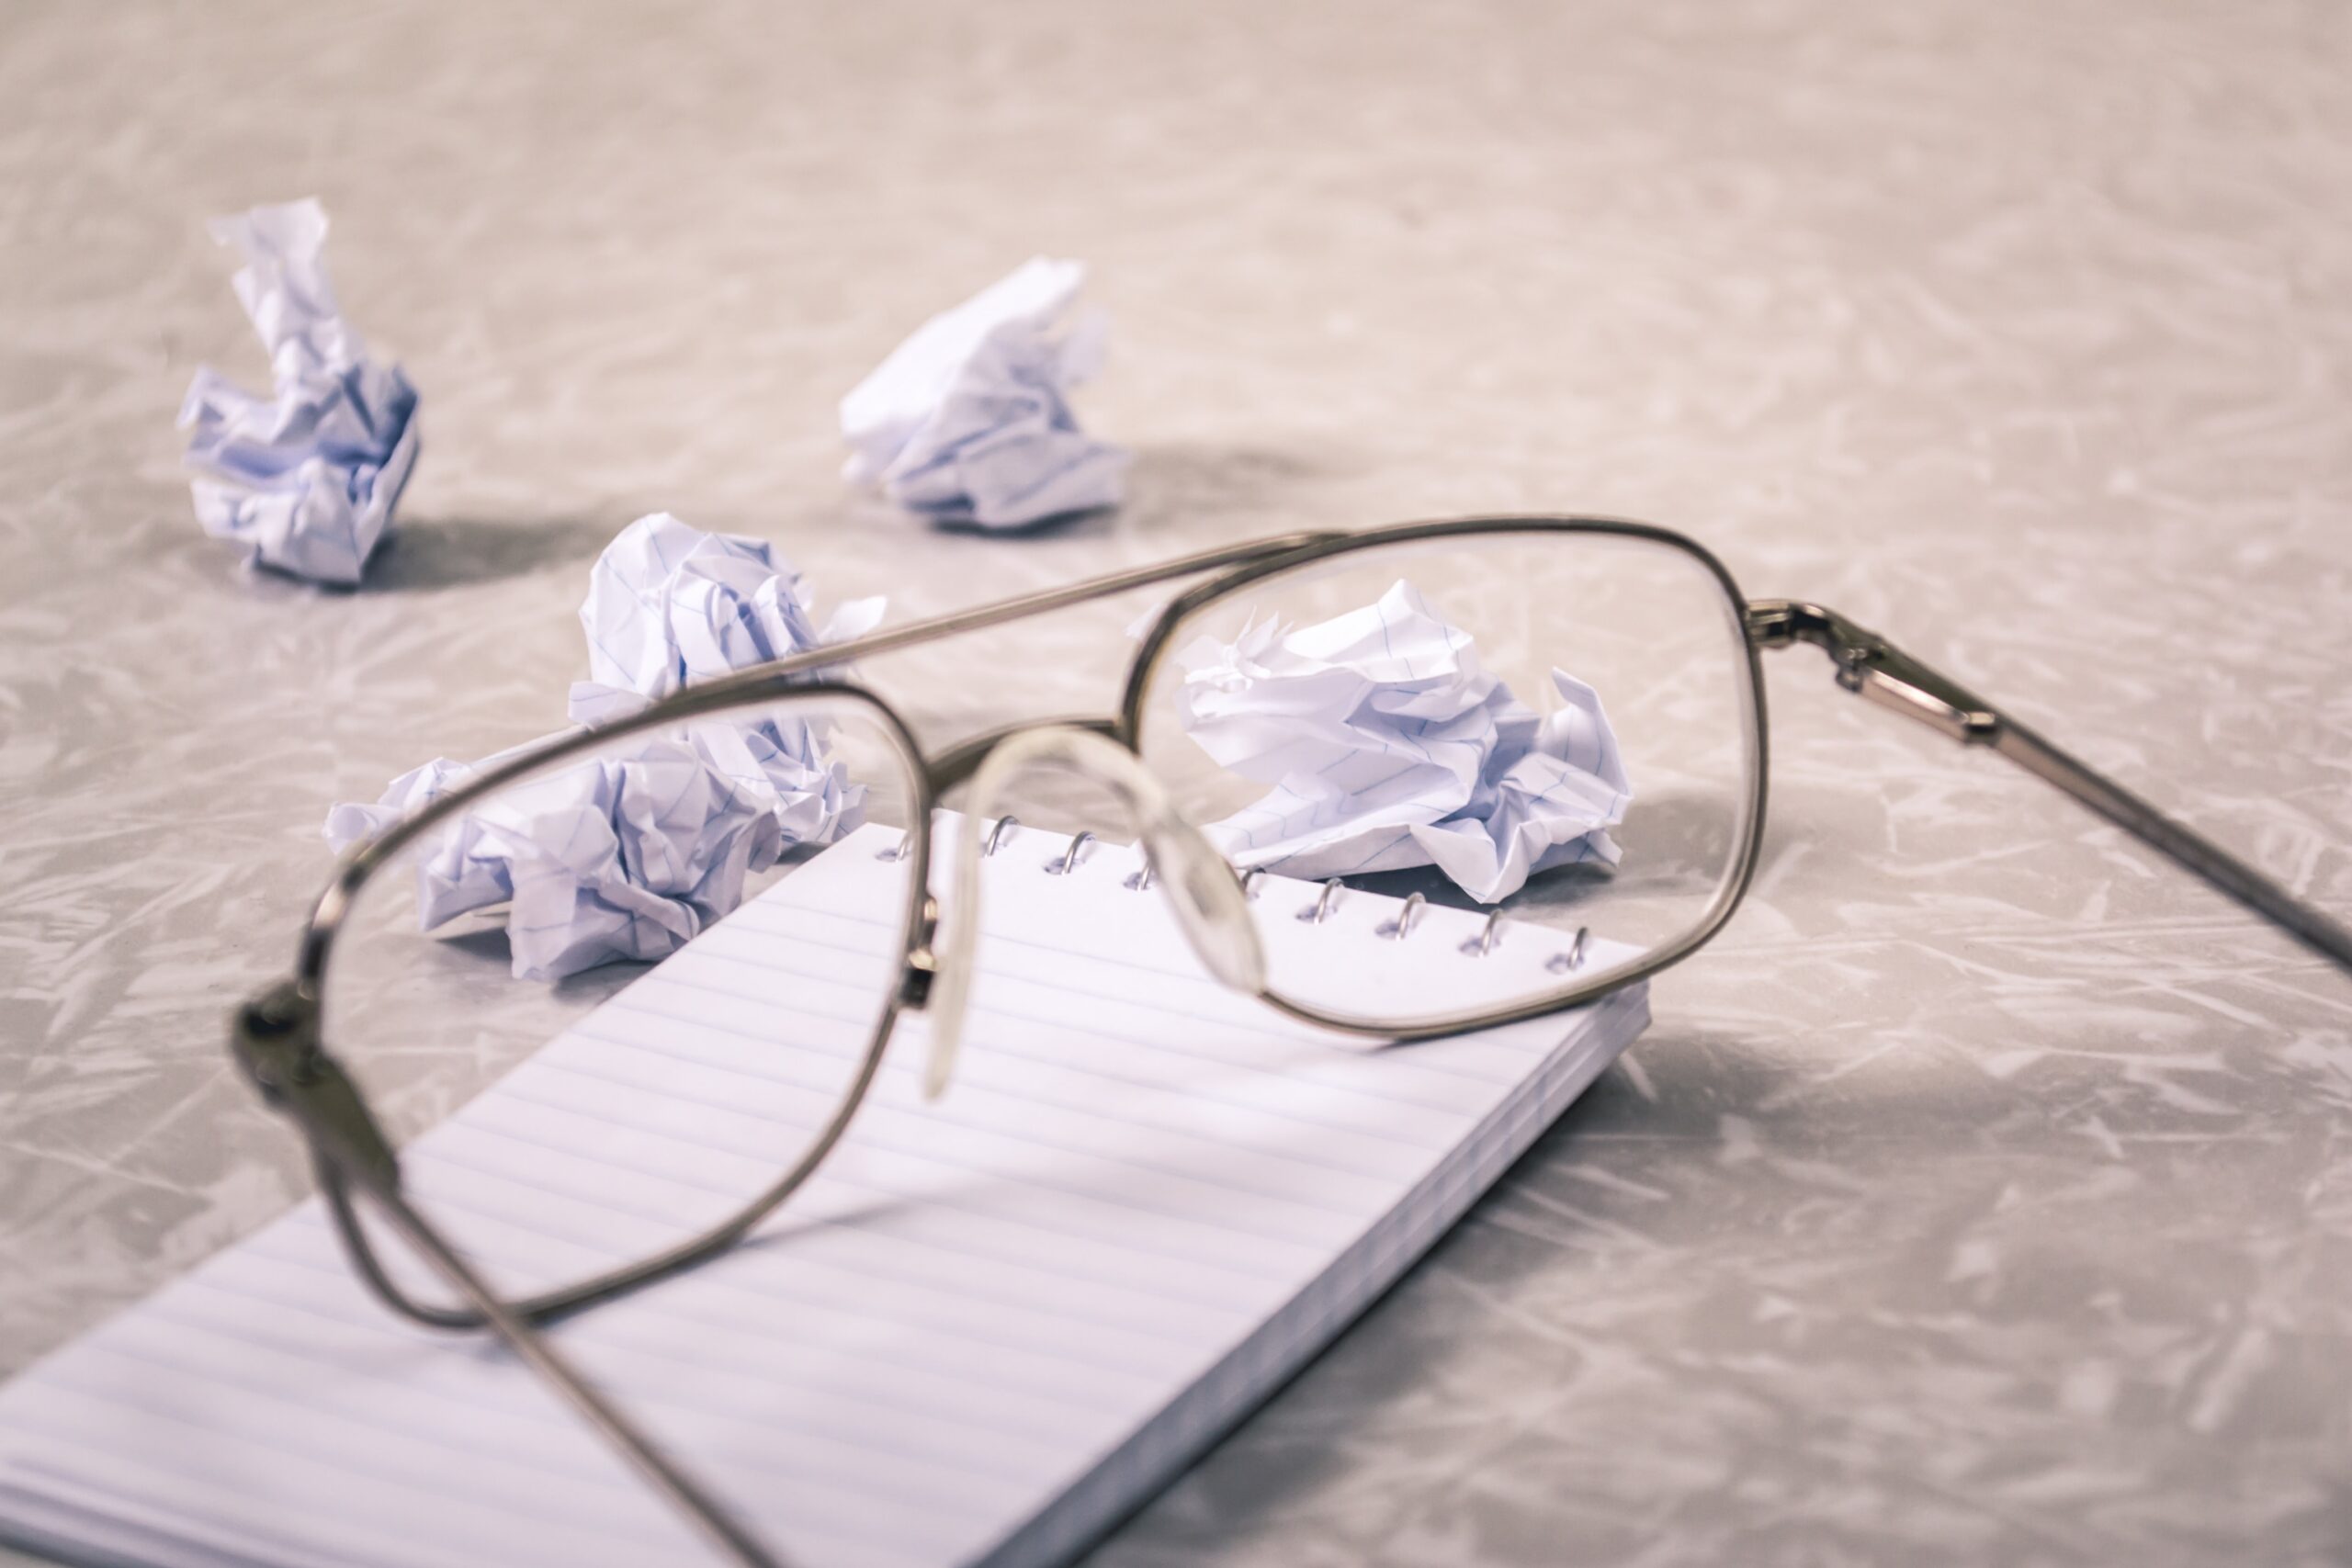 crumpled resumes and glasses